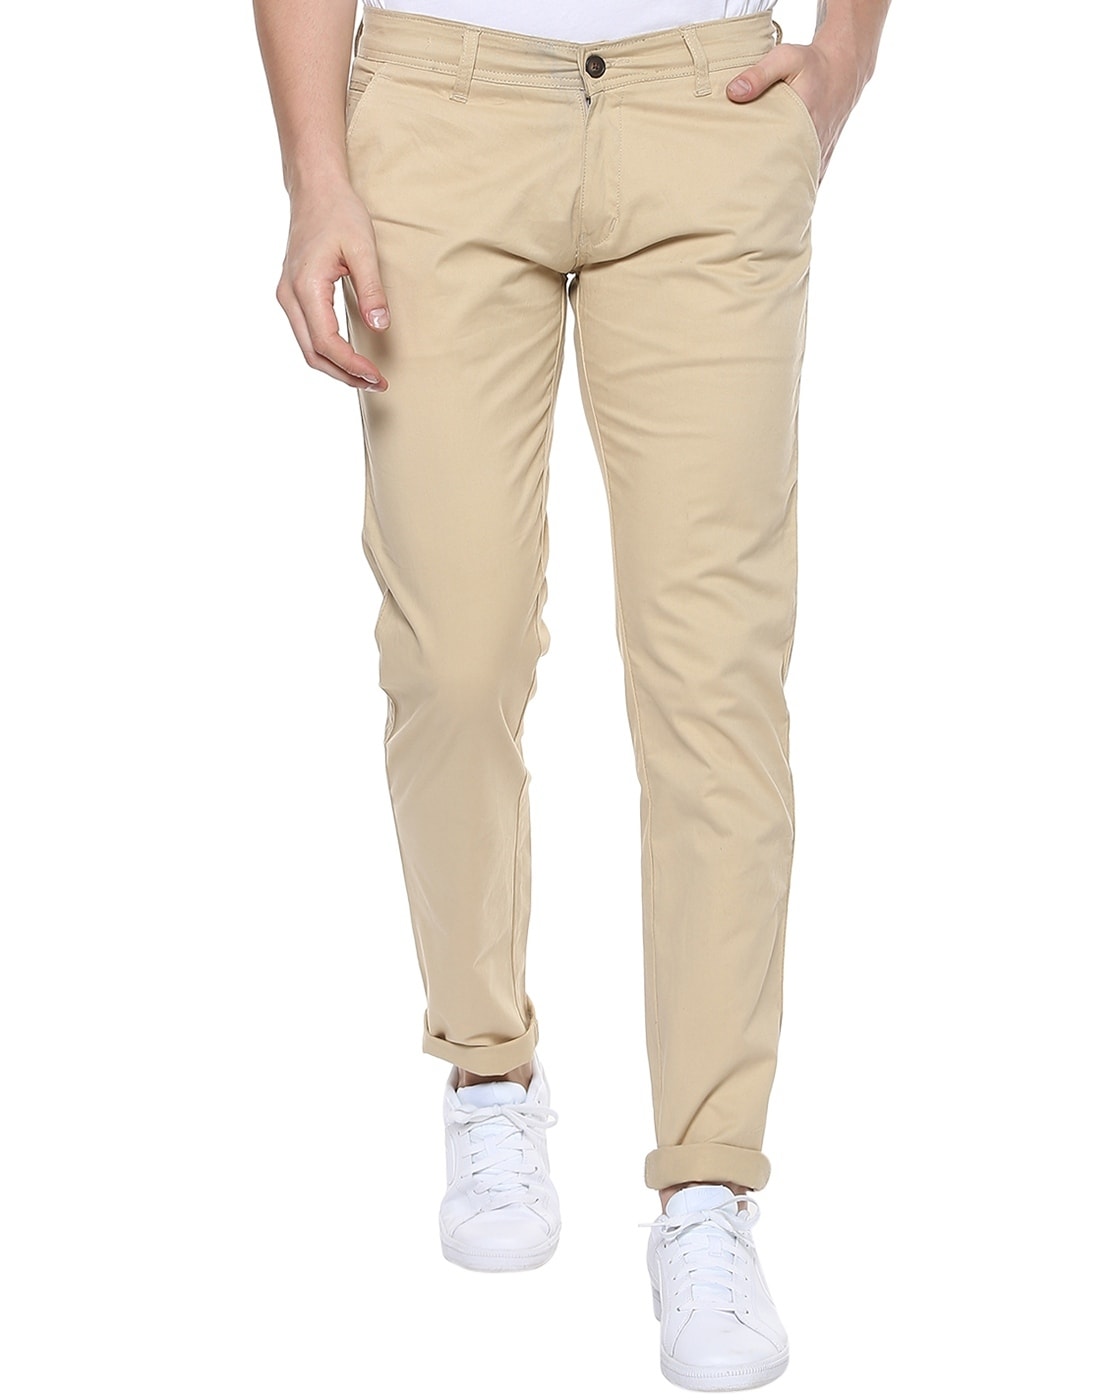 Buy British terminal green chinos for men  pant for man slim fit  stretchable trousers for men  slim fit pants for men  chinos pants for  mens  cotton chinos for